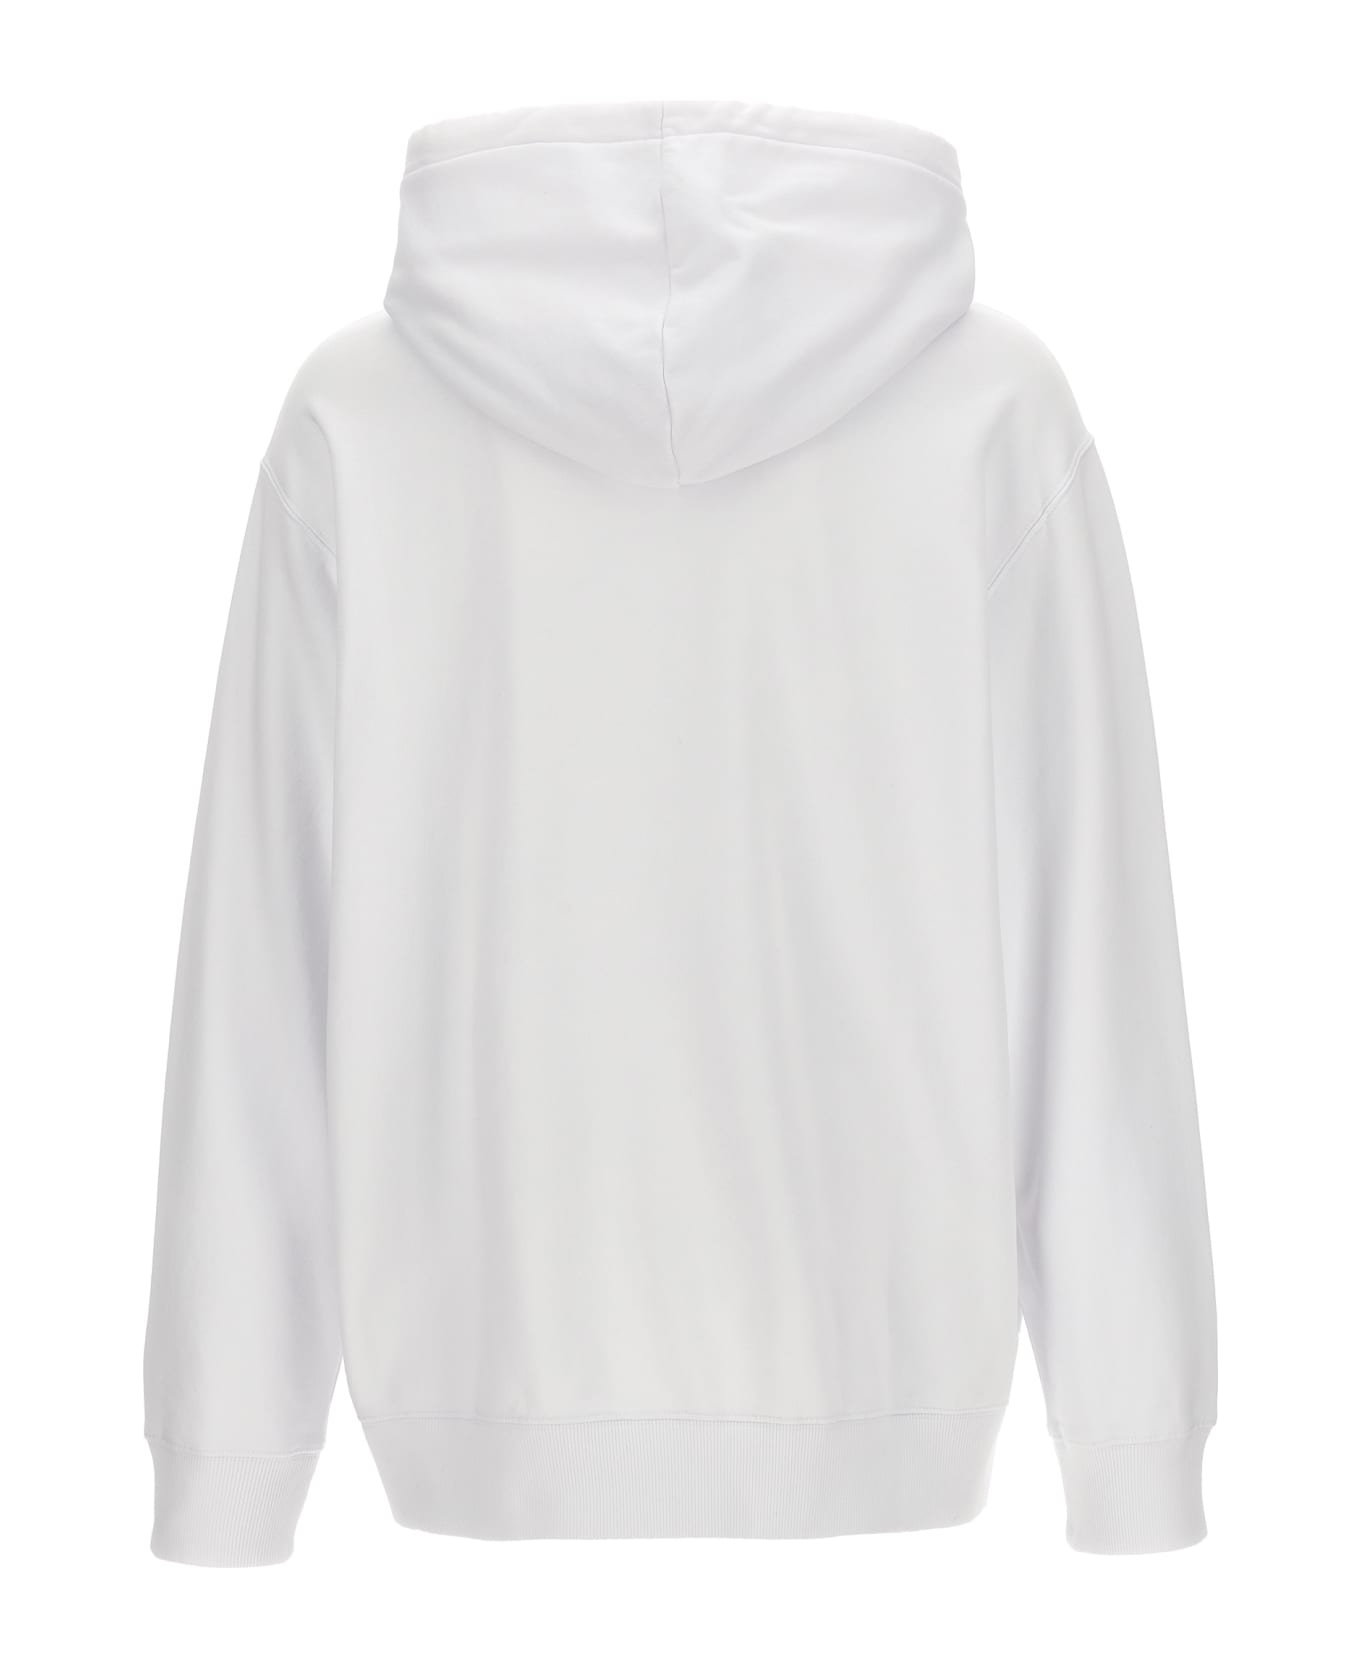 Lanvin Logo Embroidery Hoodie - White